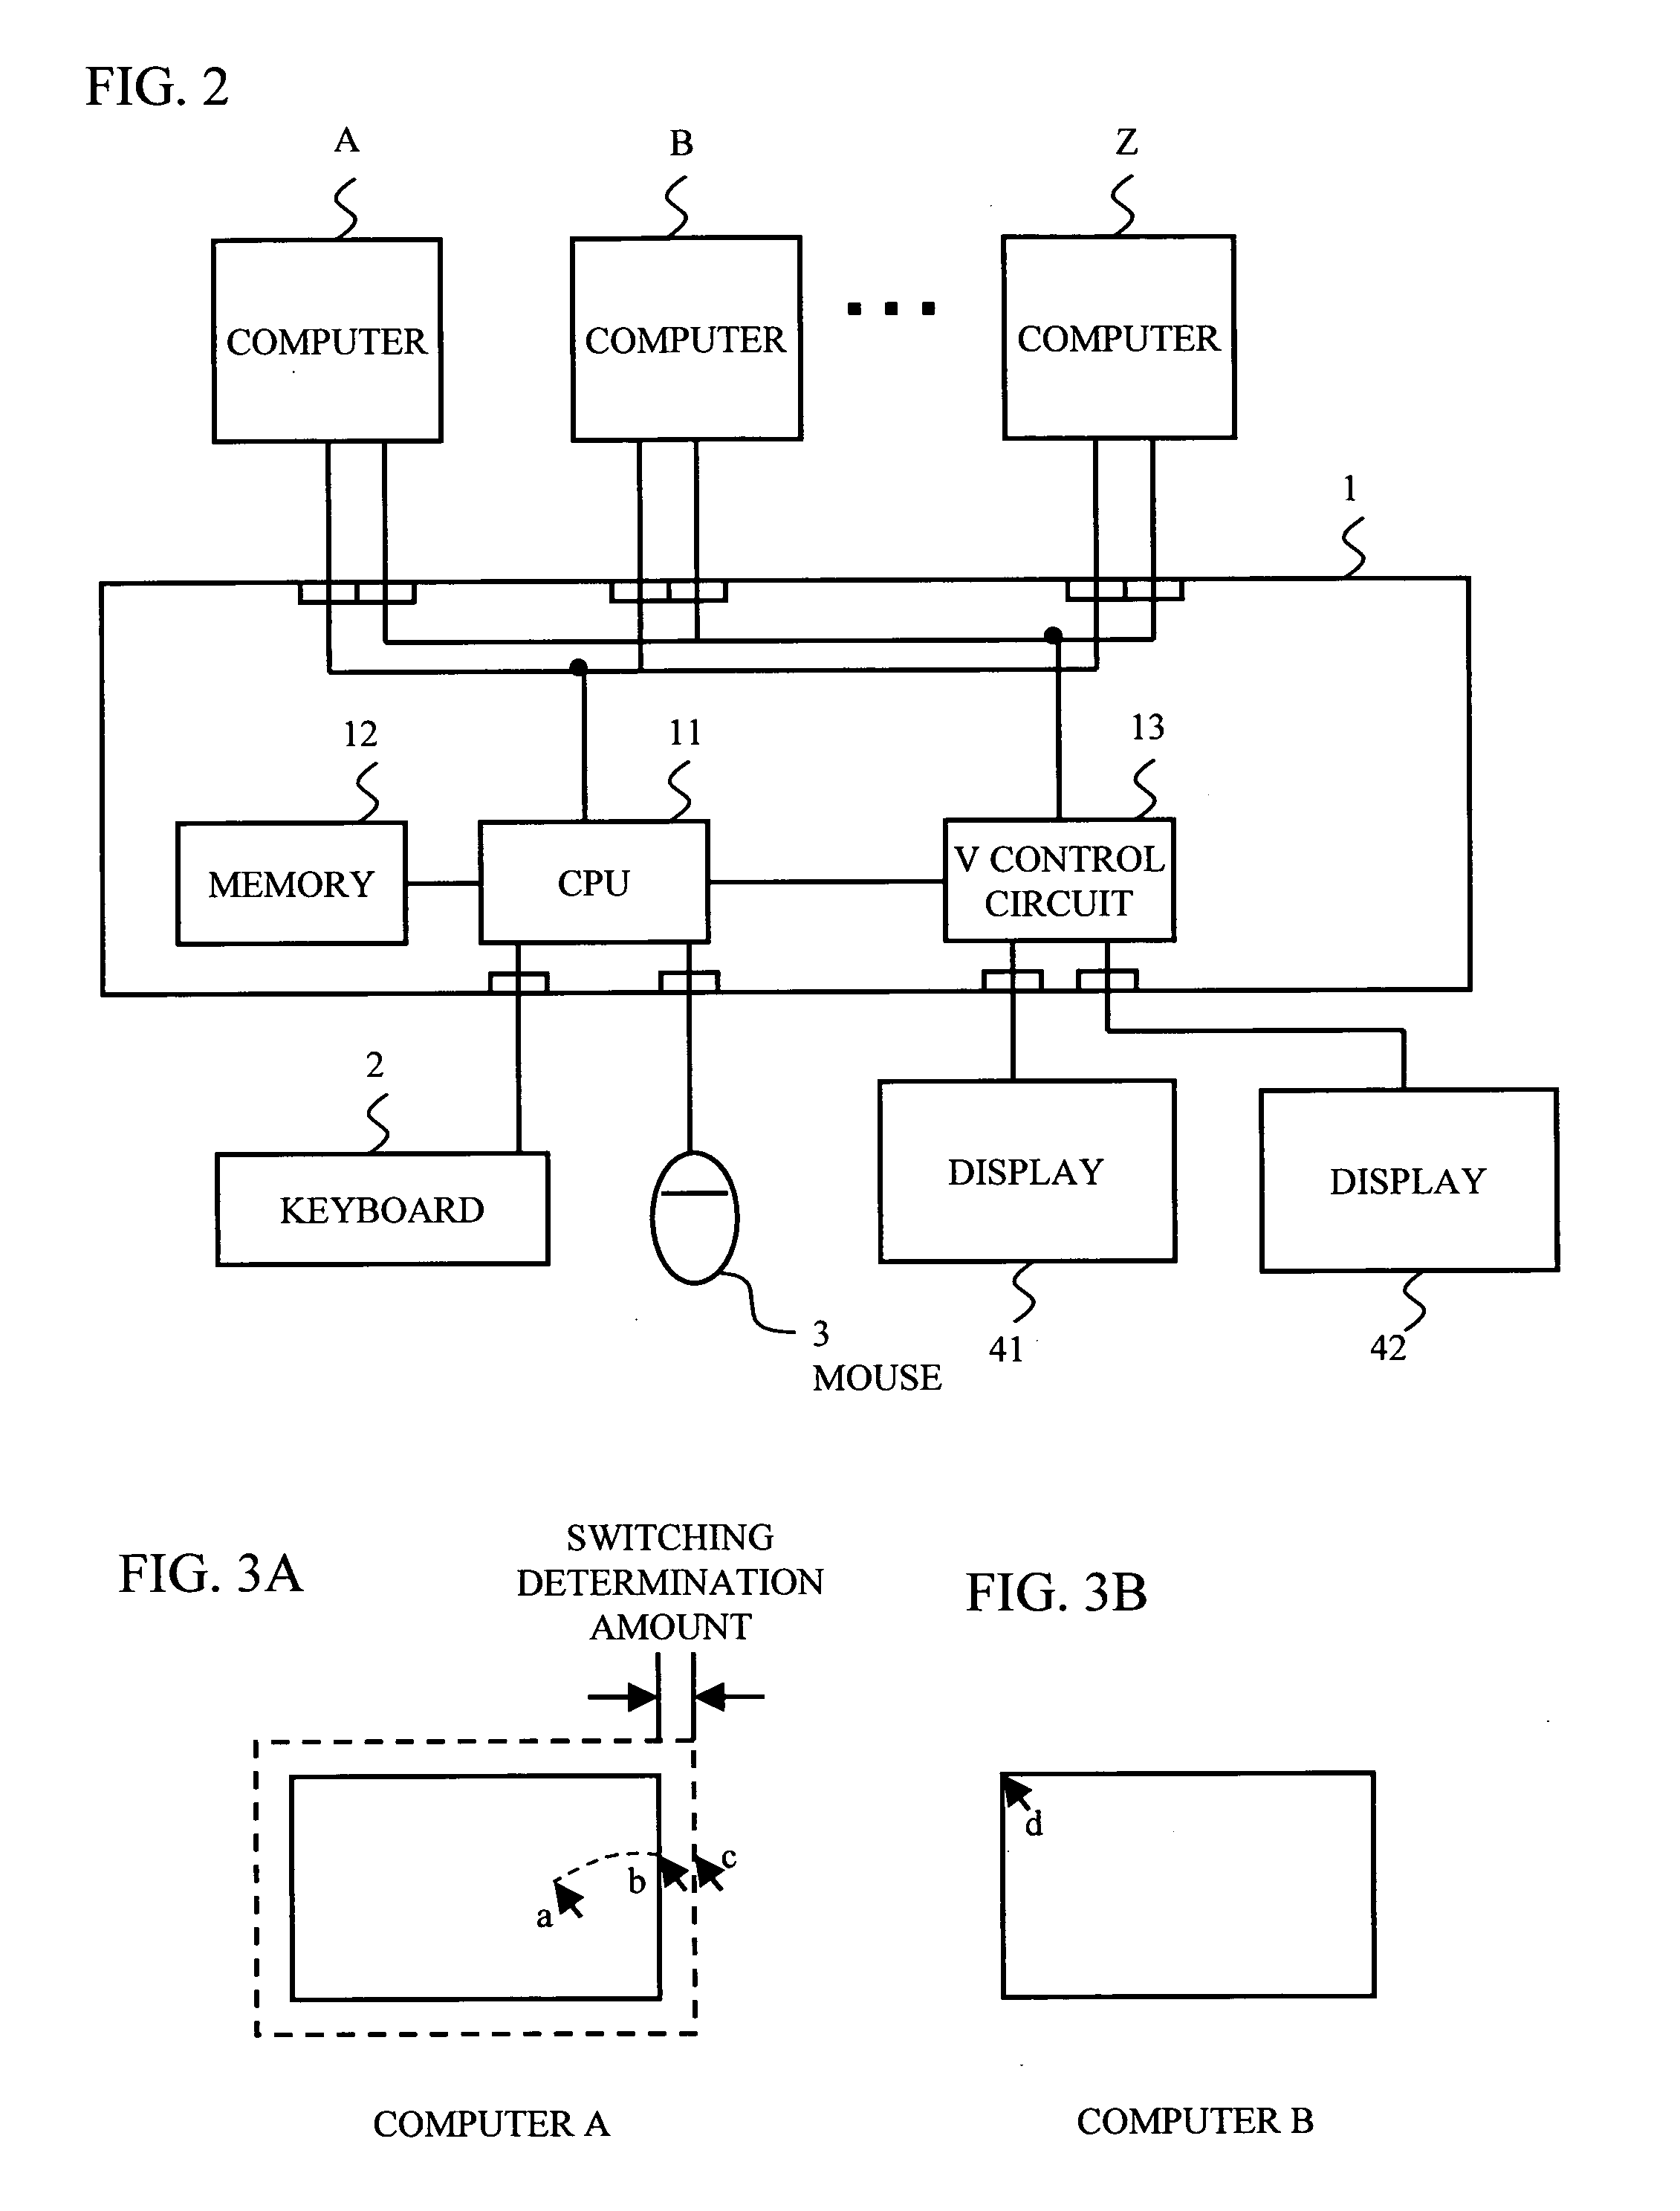 Switching device and switching methods of the same